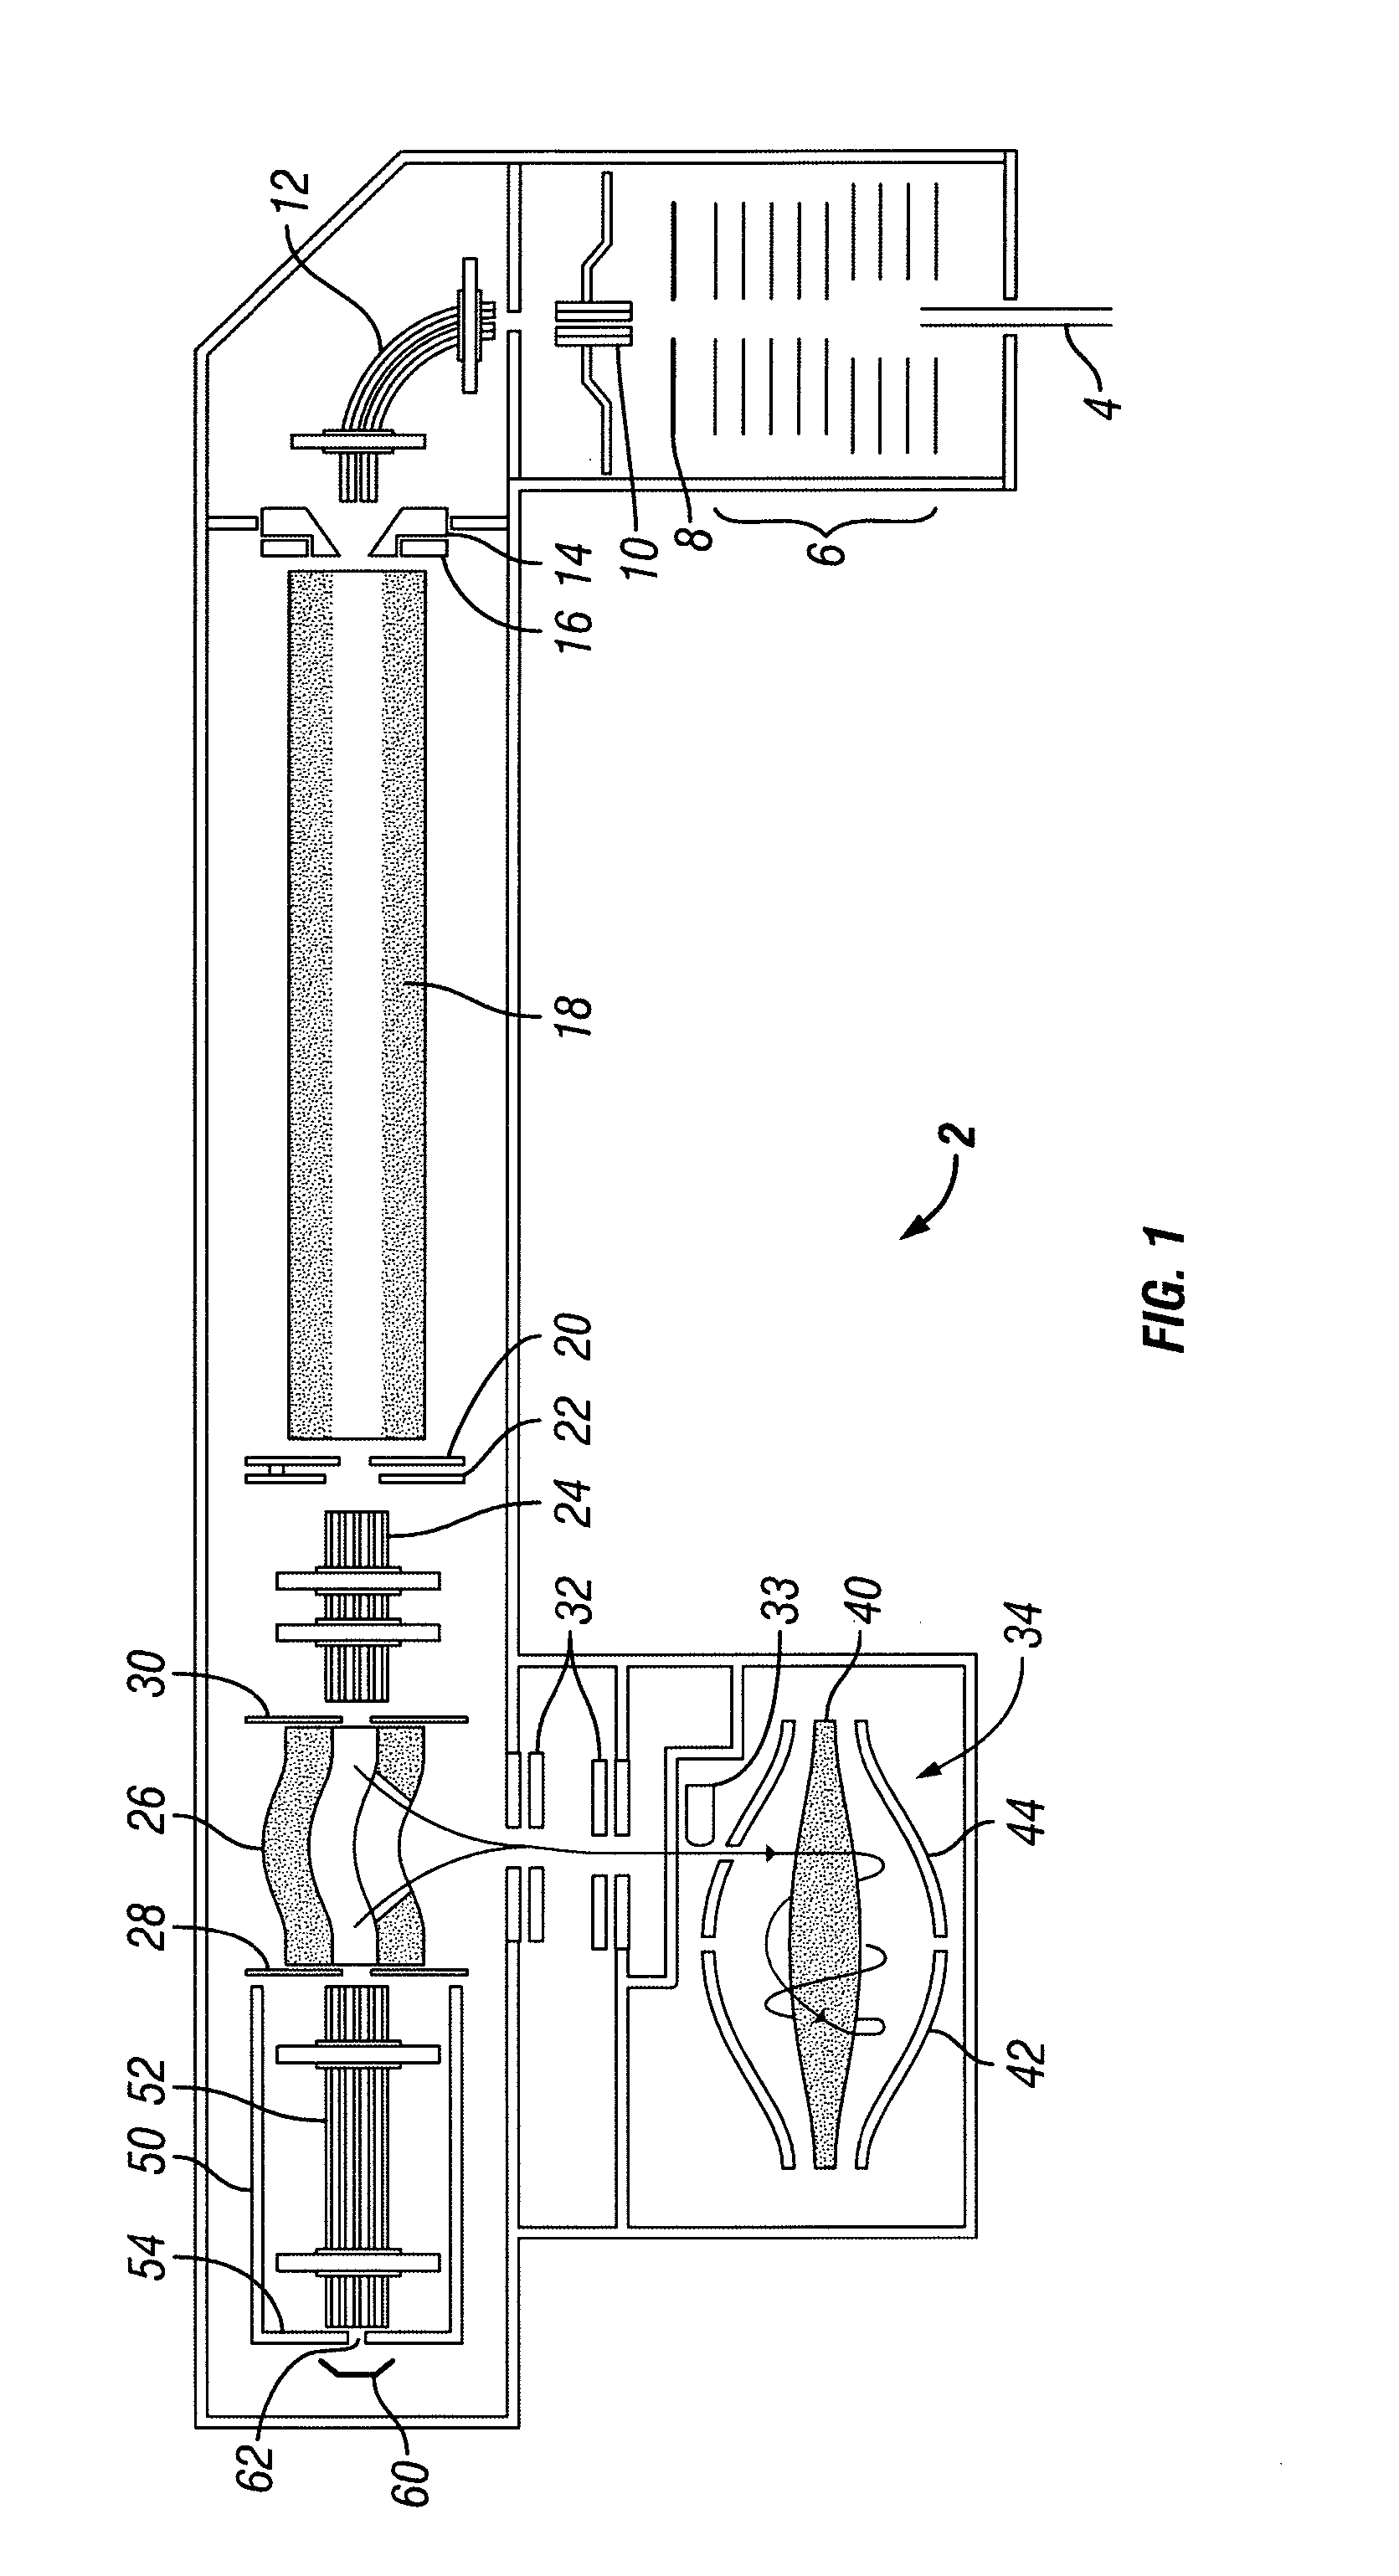 Method and Apparatus for Mass Analysis